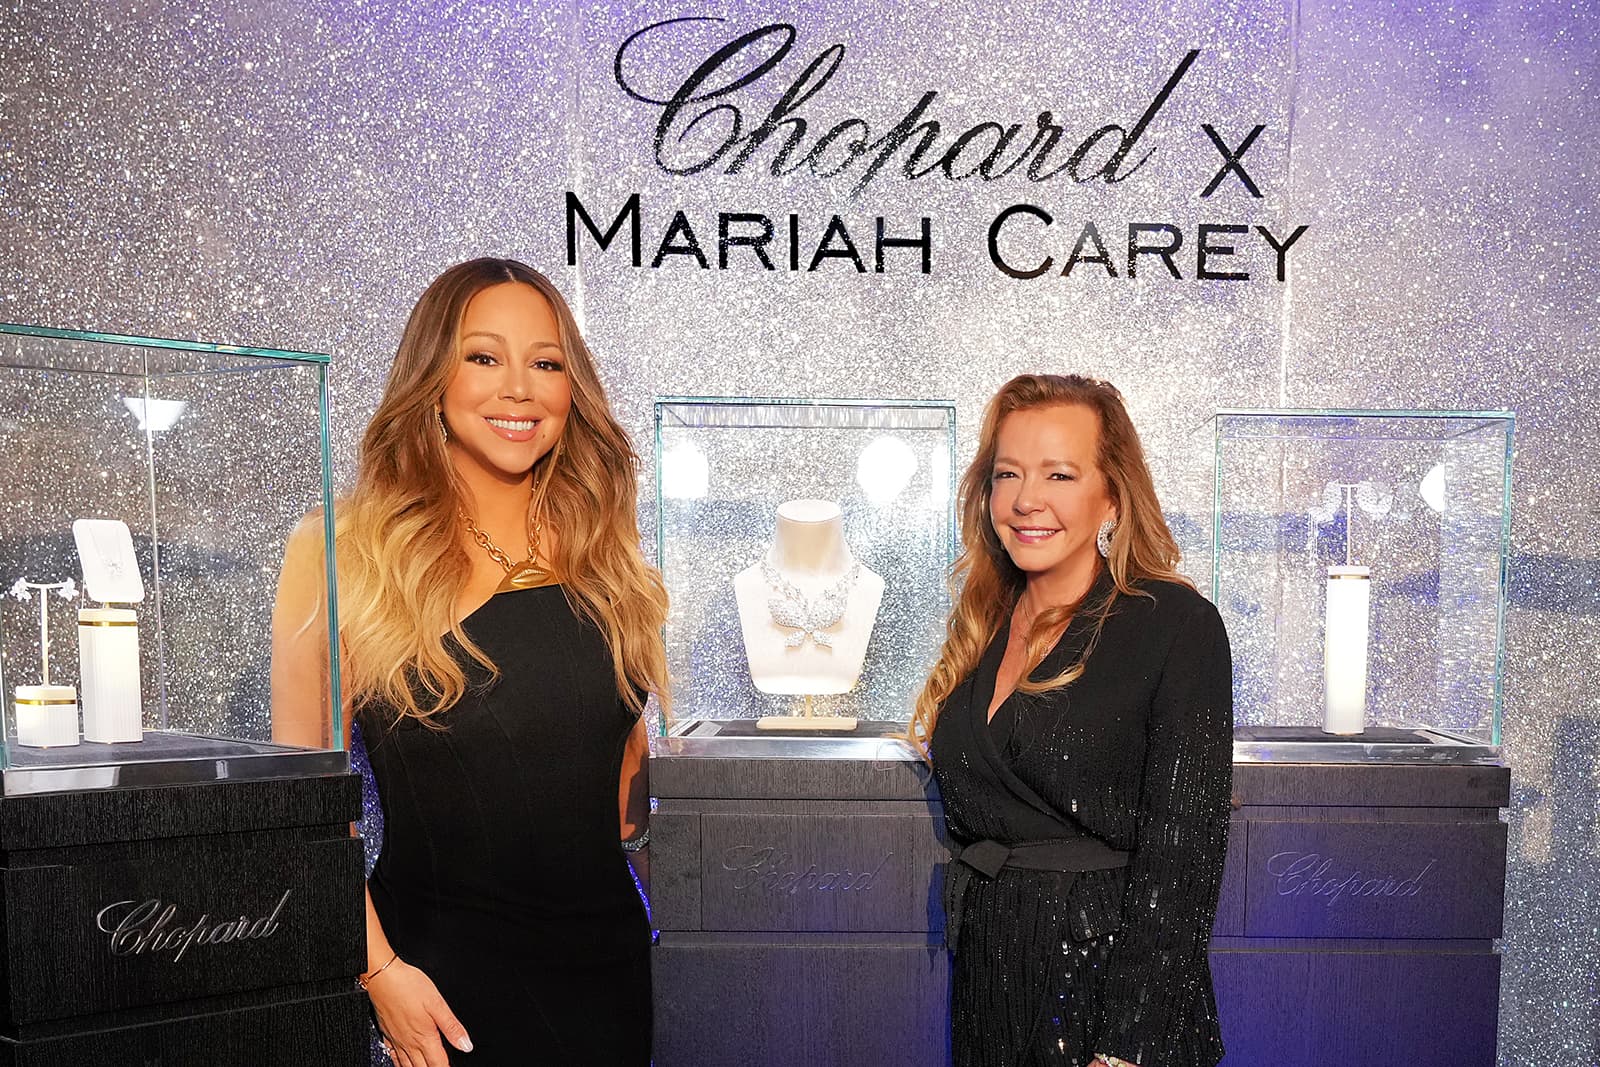 Artist Mariah Carey with Chopard Co-President and Artistic Director Caroline Scheufele at the preview event of the Chopard X Mariah Carey collection in New York City 